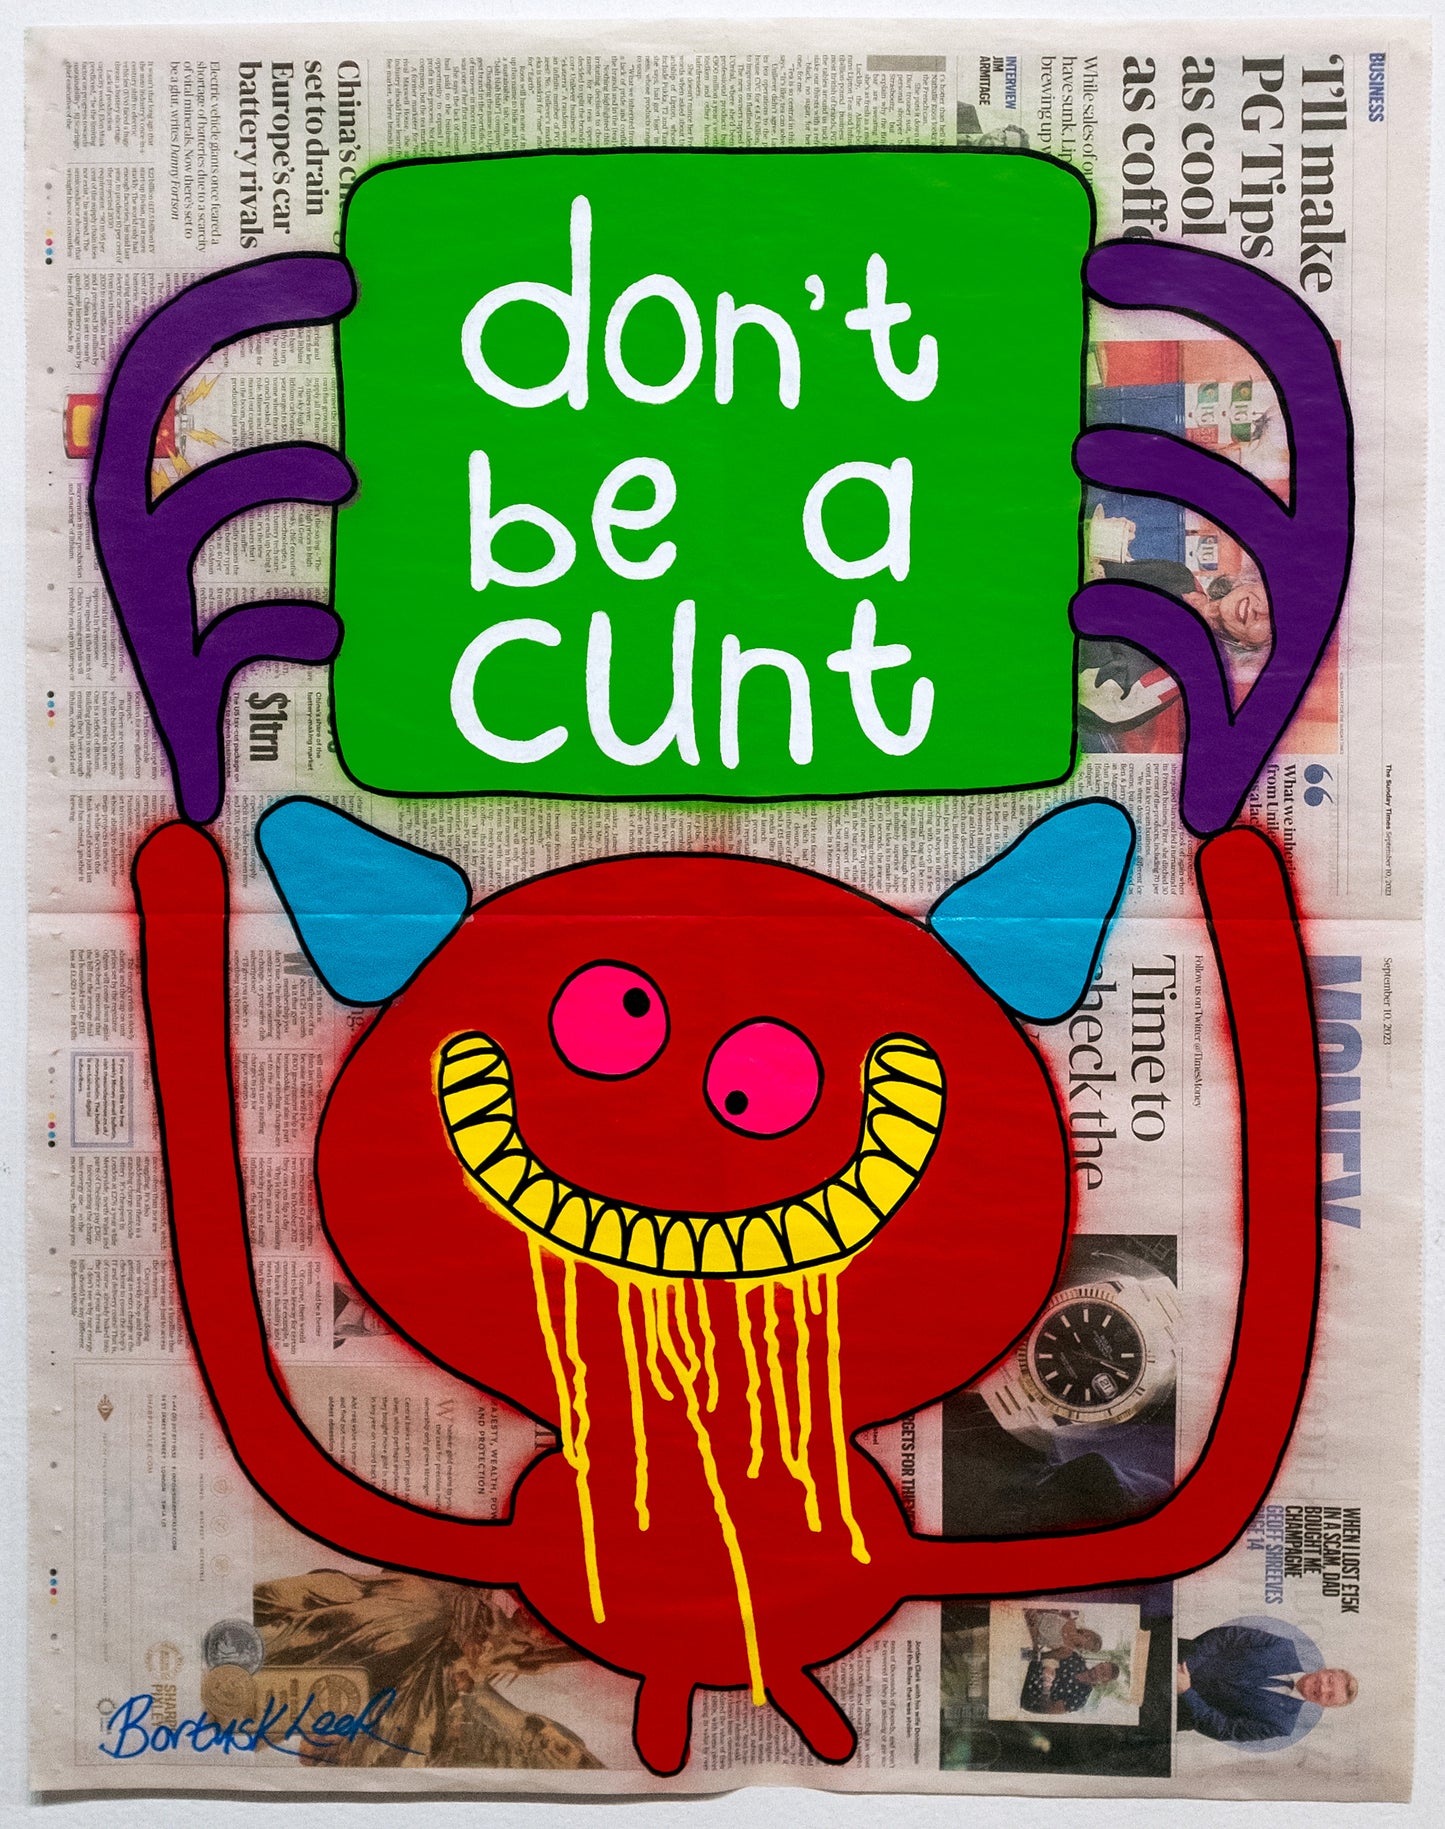 don't be a cunt by Bortusk Leer